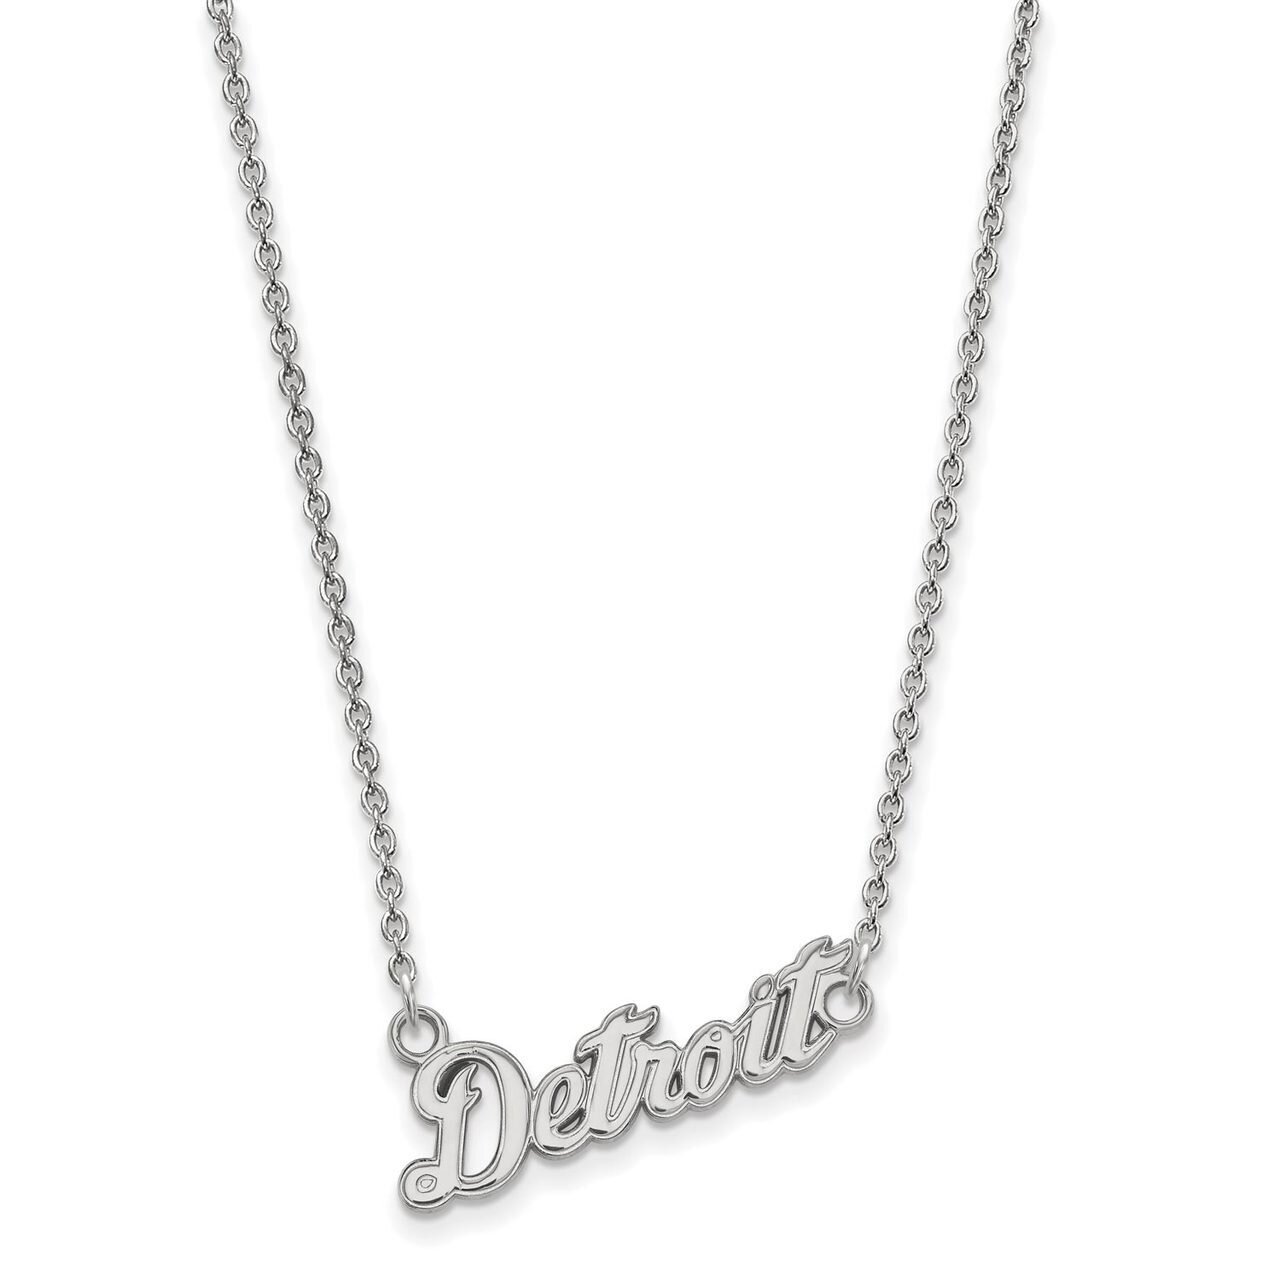 Detroit Tigers Small Pendant with Chain Necklace 14k White Gold 4W061TIG-18